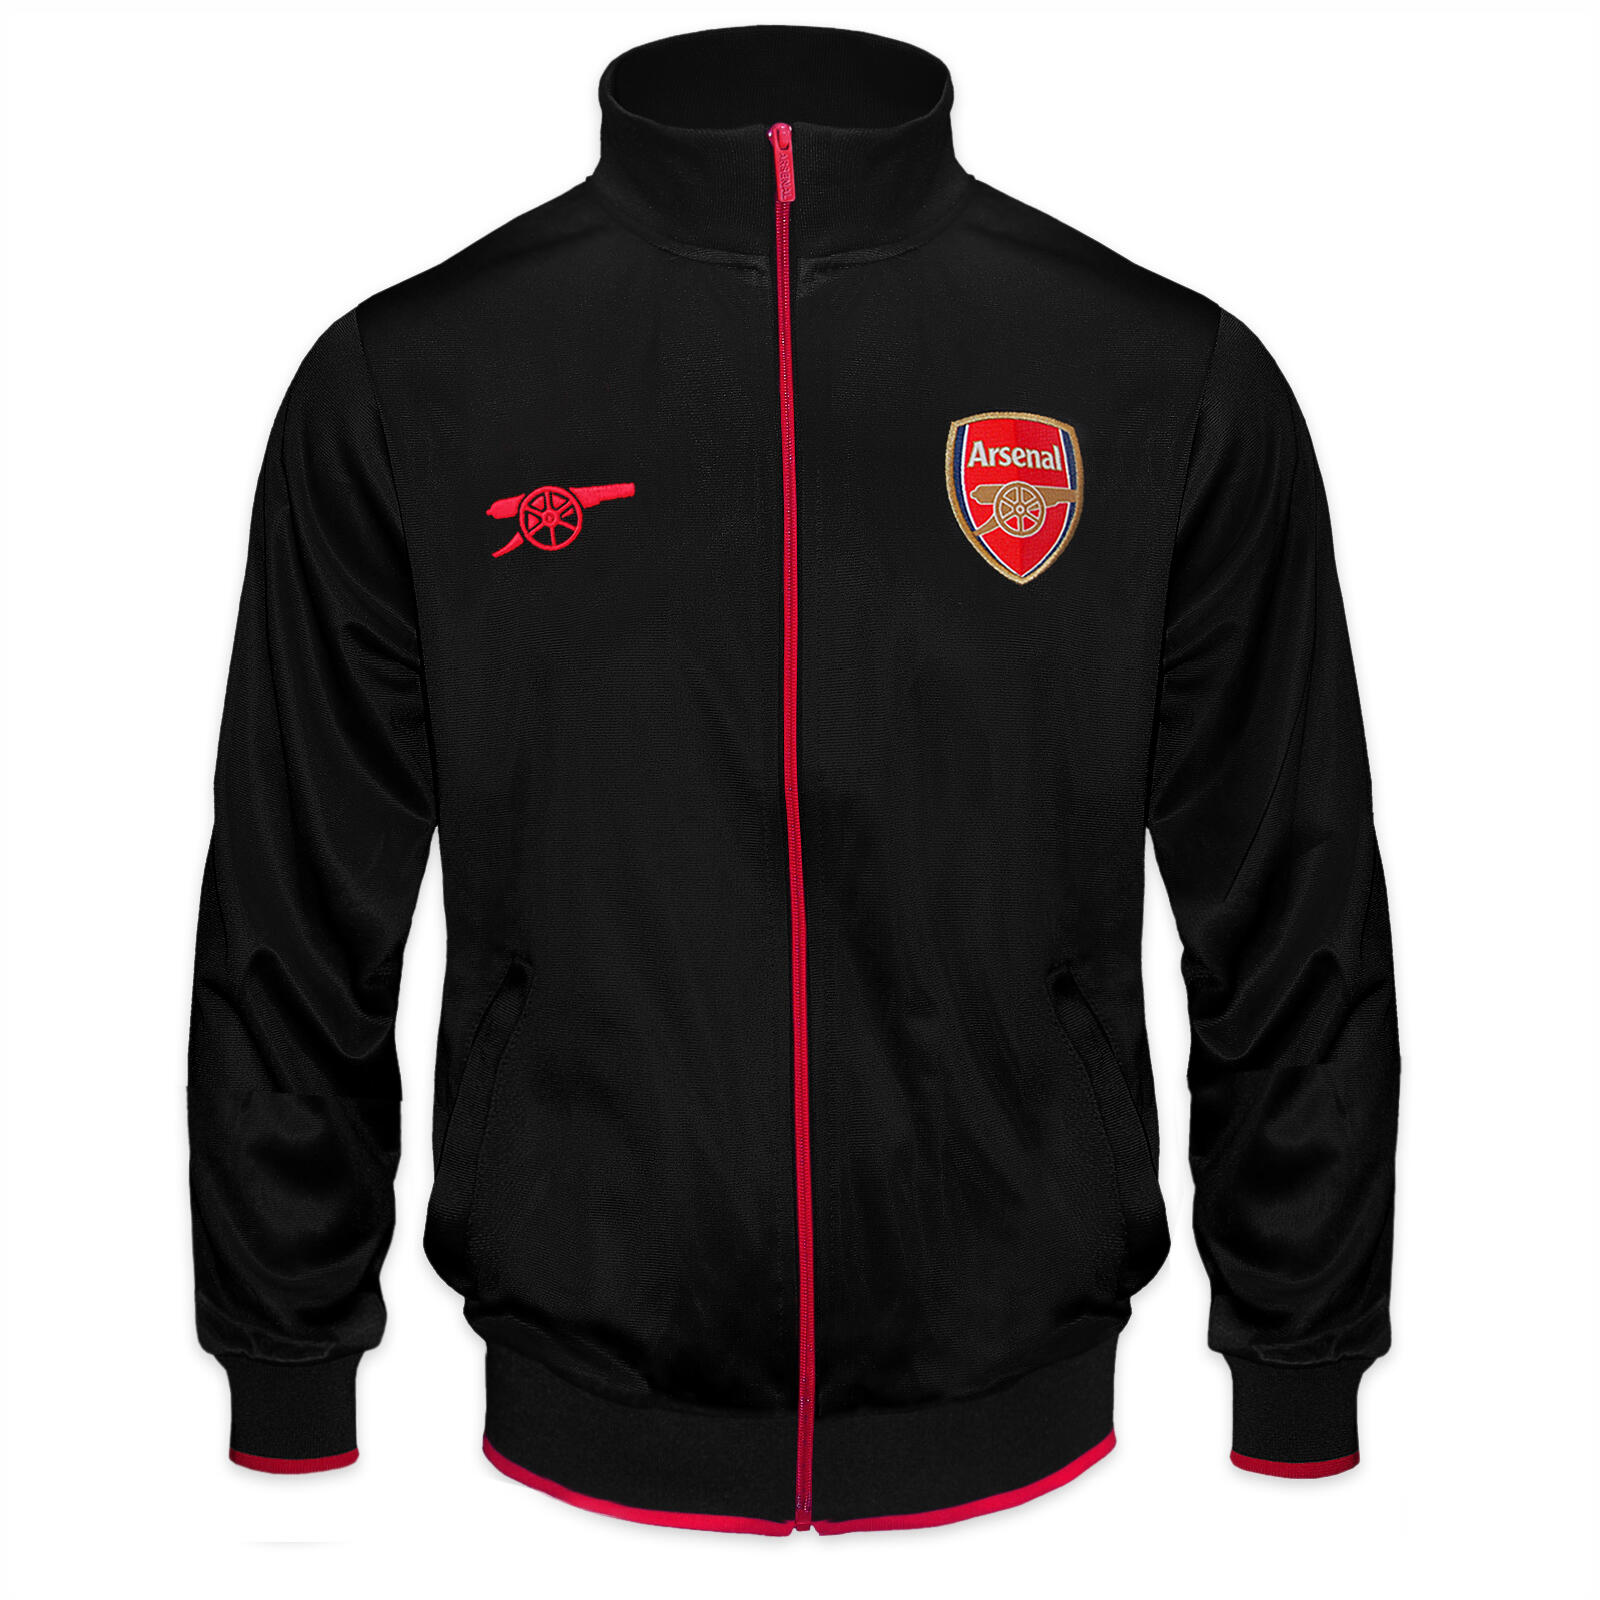 Arsenal FC Boys Jacket Track Top Retro Kids OFFICIAL Football Gift 1/1